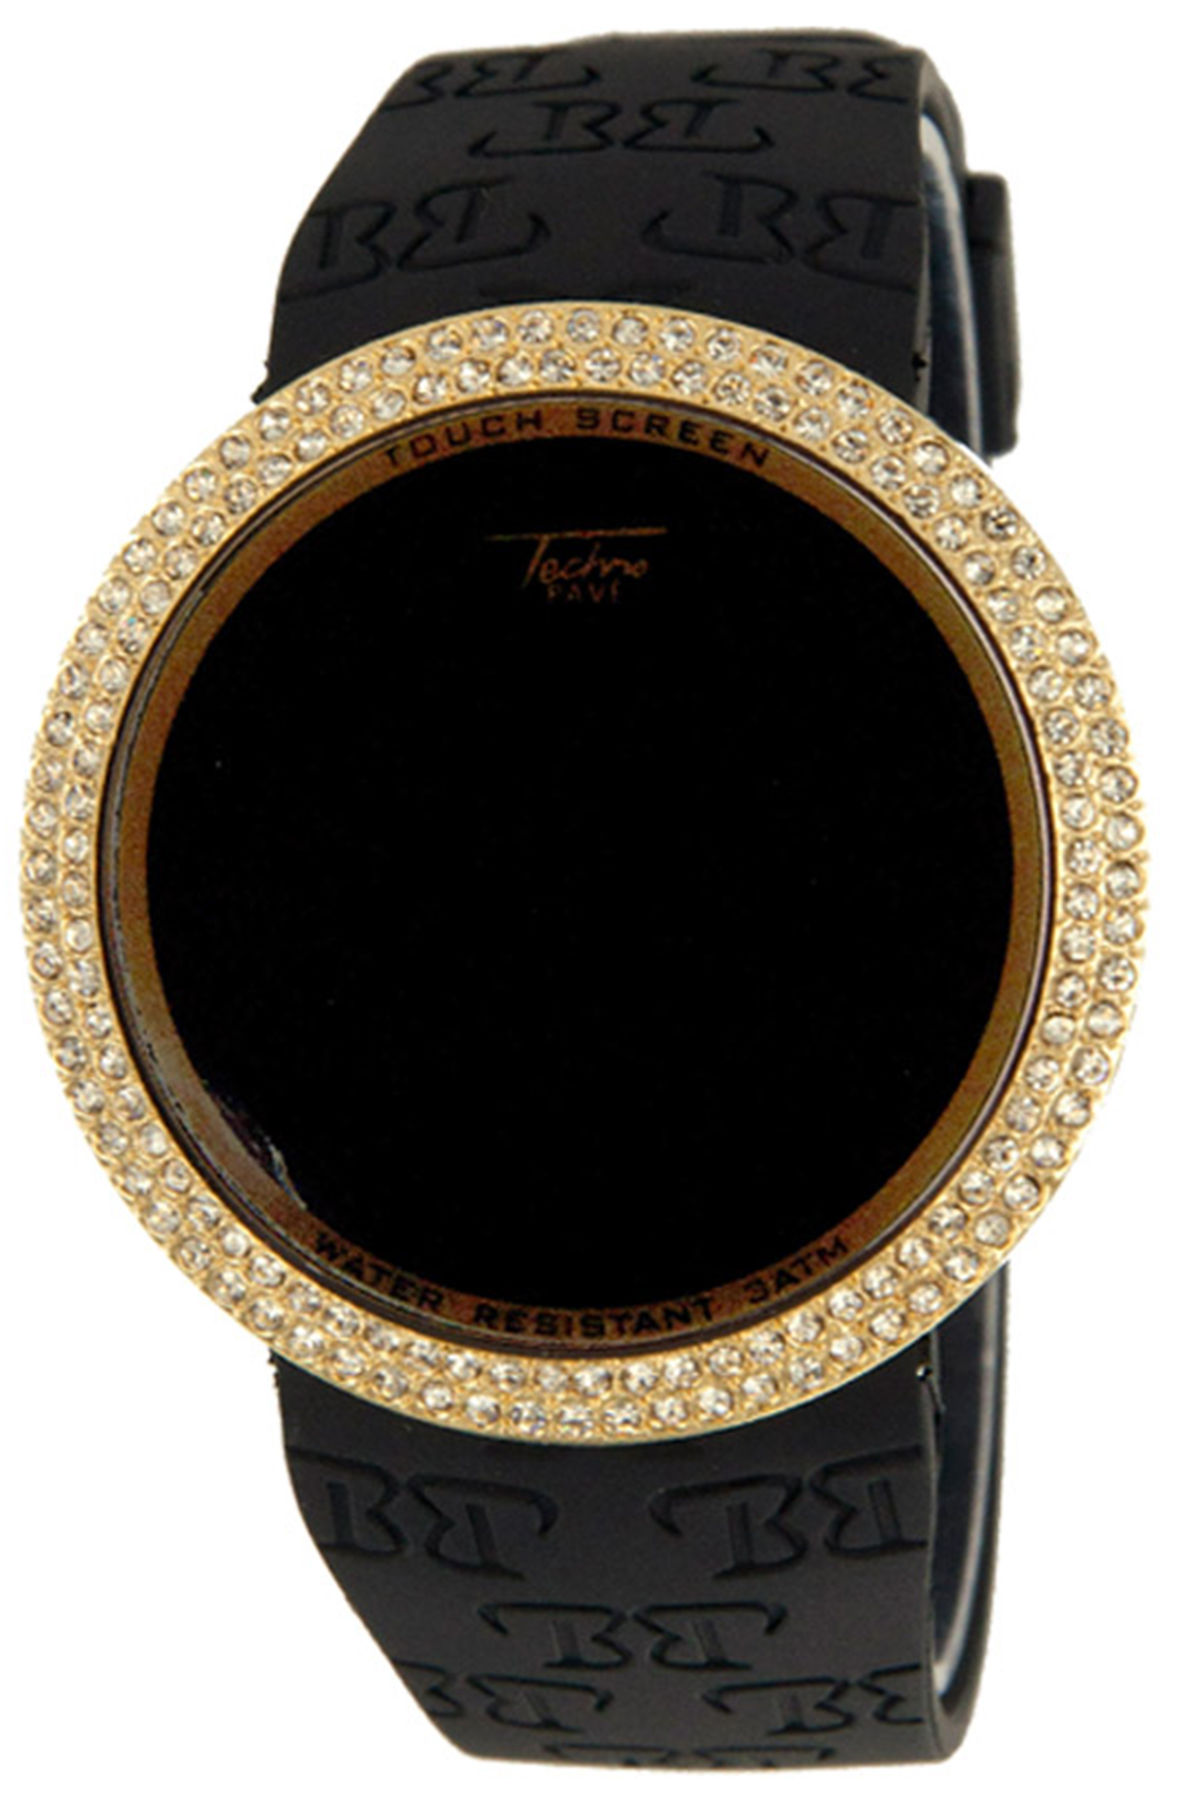 gold touch screen watch